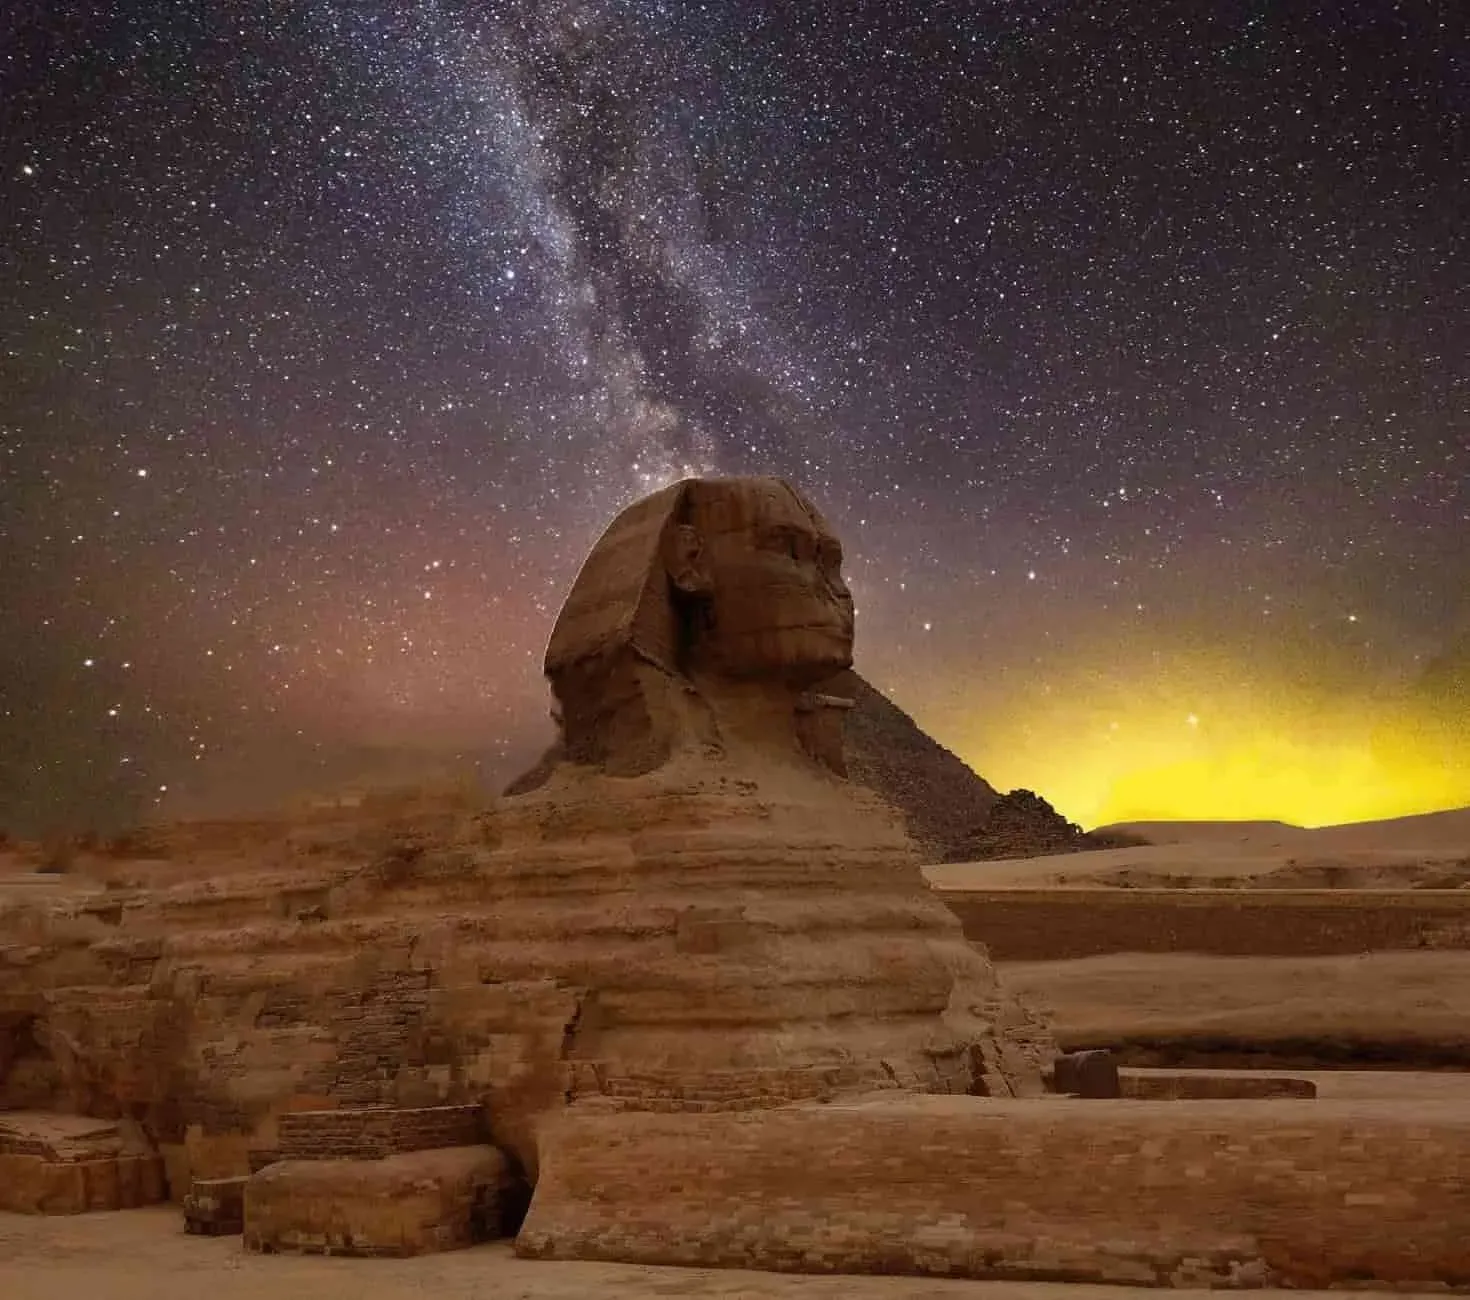 Ancient Egyptians were the first people to identify constellations.